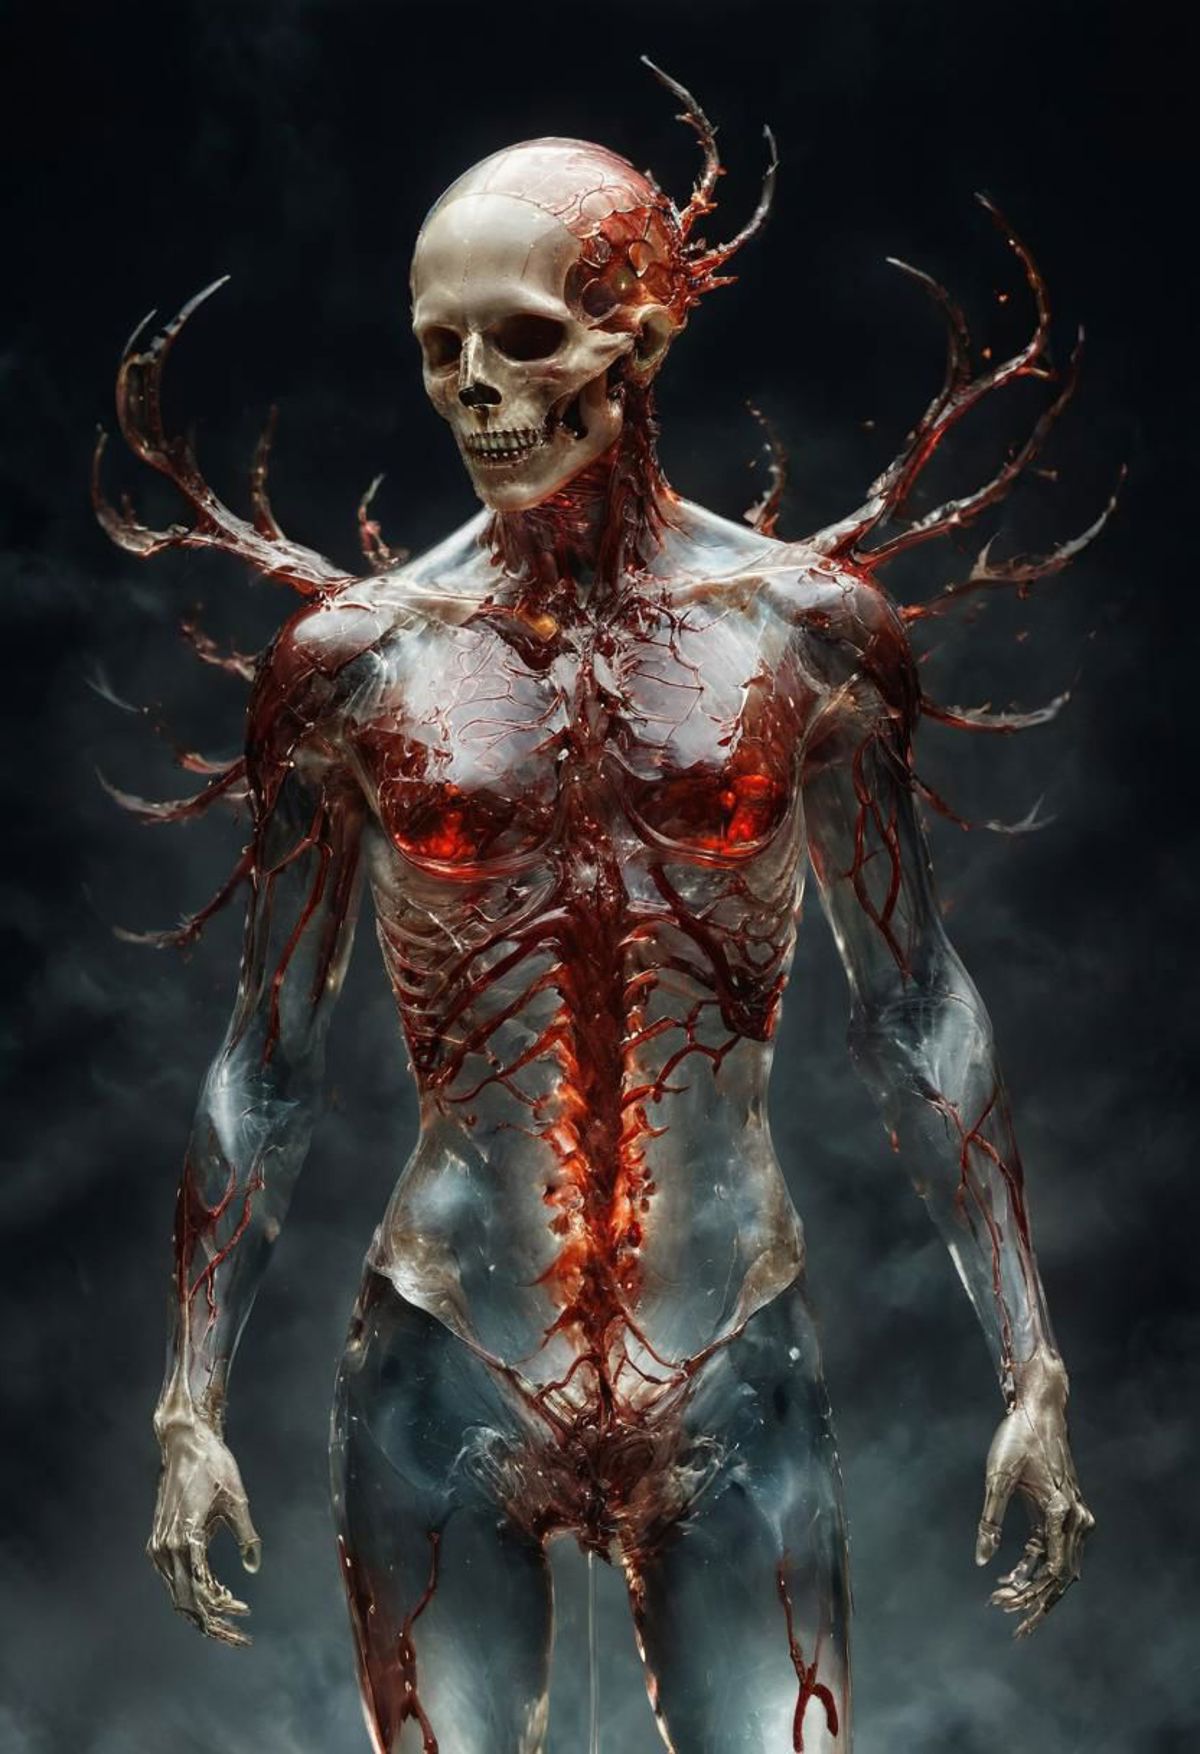 Dark and eerie image of a skeleton with a red rib cage and a skull face.